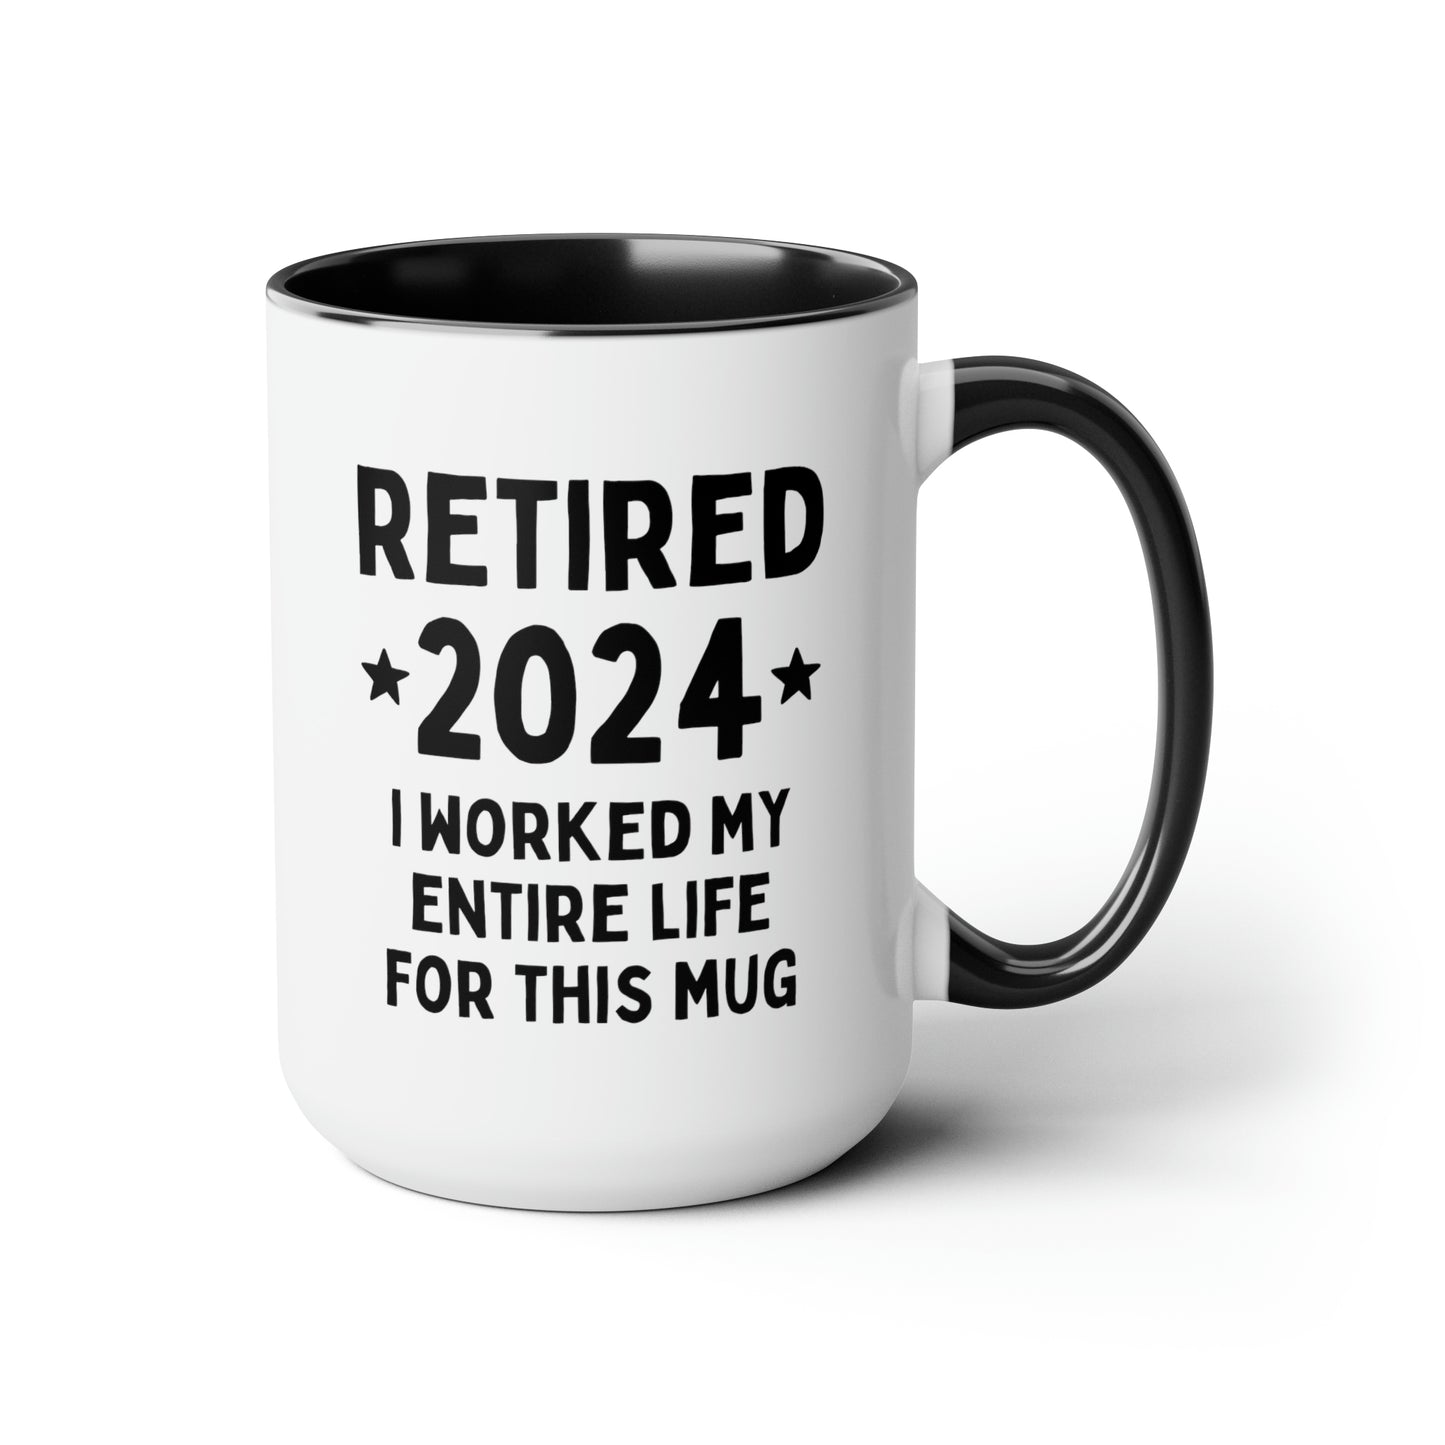 Retired 2024 I Worked My Entire Life For This Mug 15oz white with black accent funny large coffee mug gift for retirement man woman waveywares wavey wares wavywares wavy wares